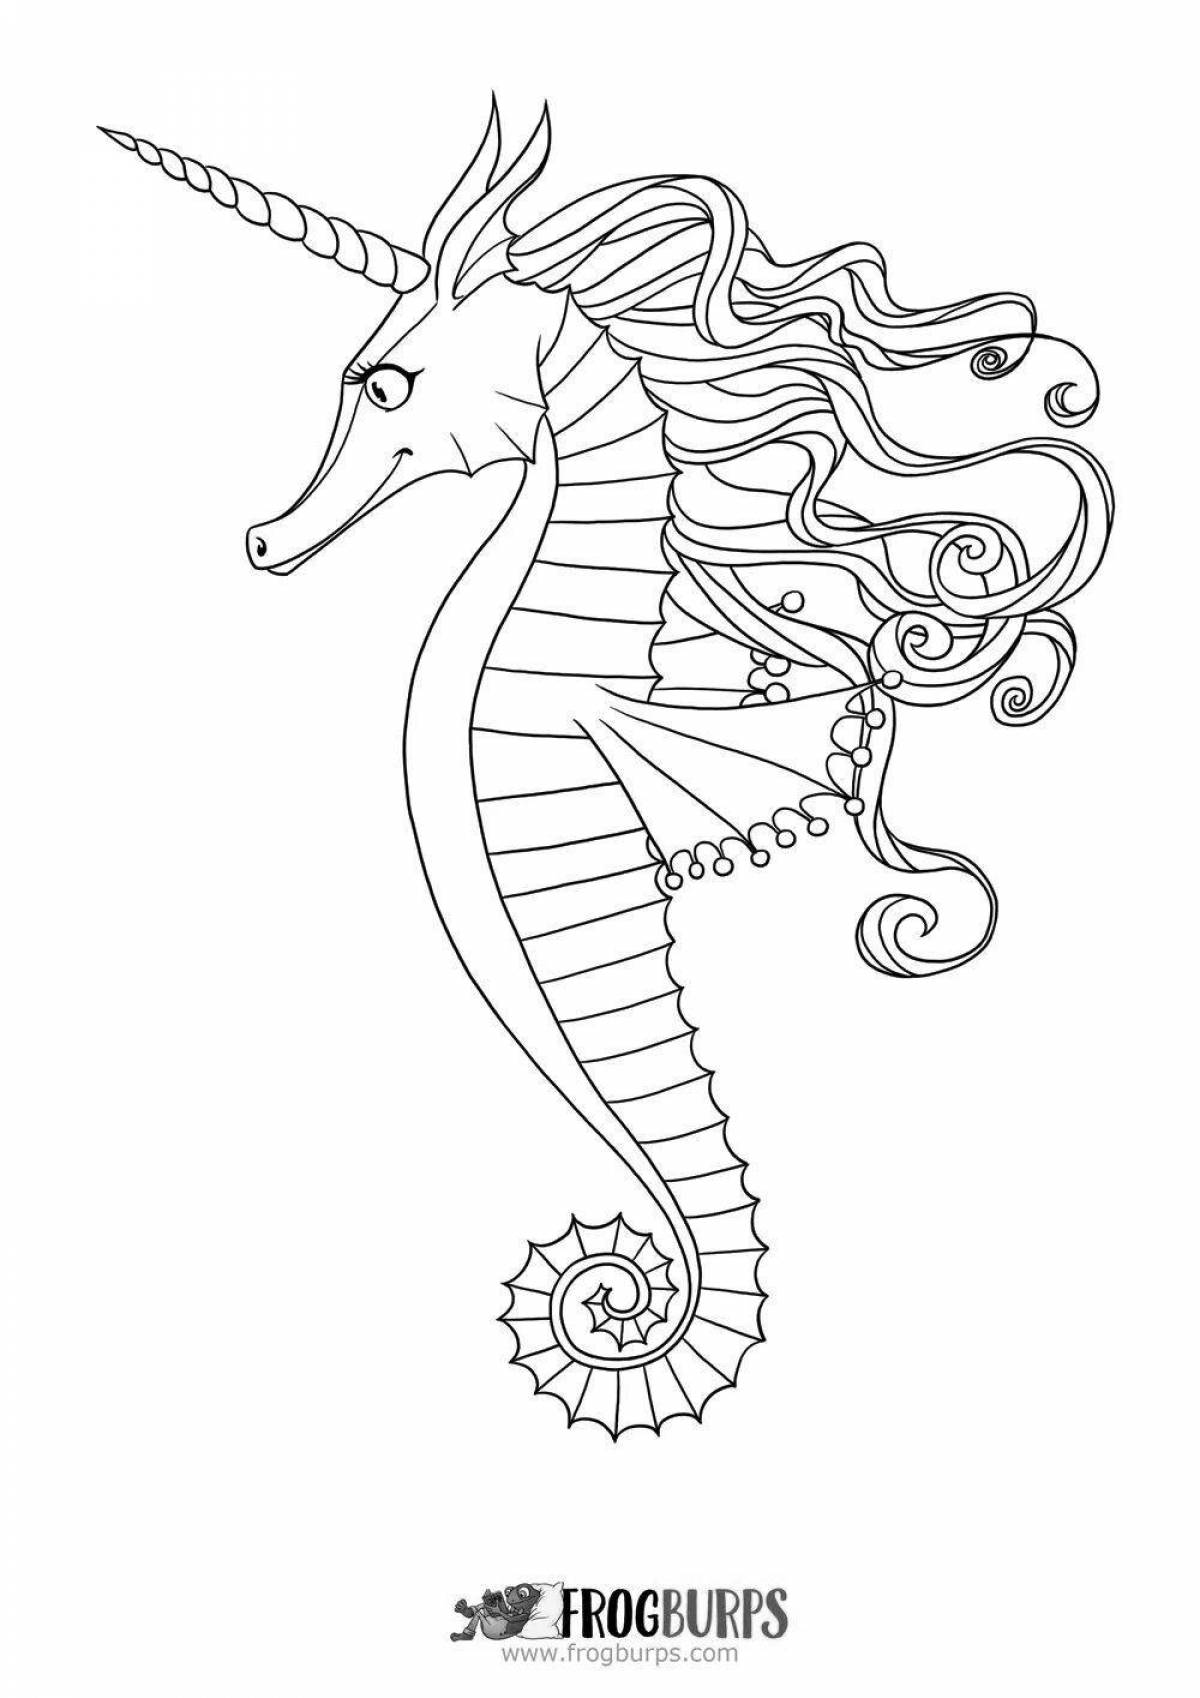 Wonderful sea horse coloring book for kids